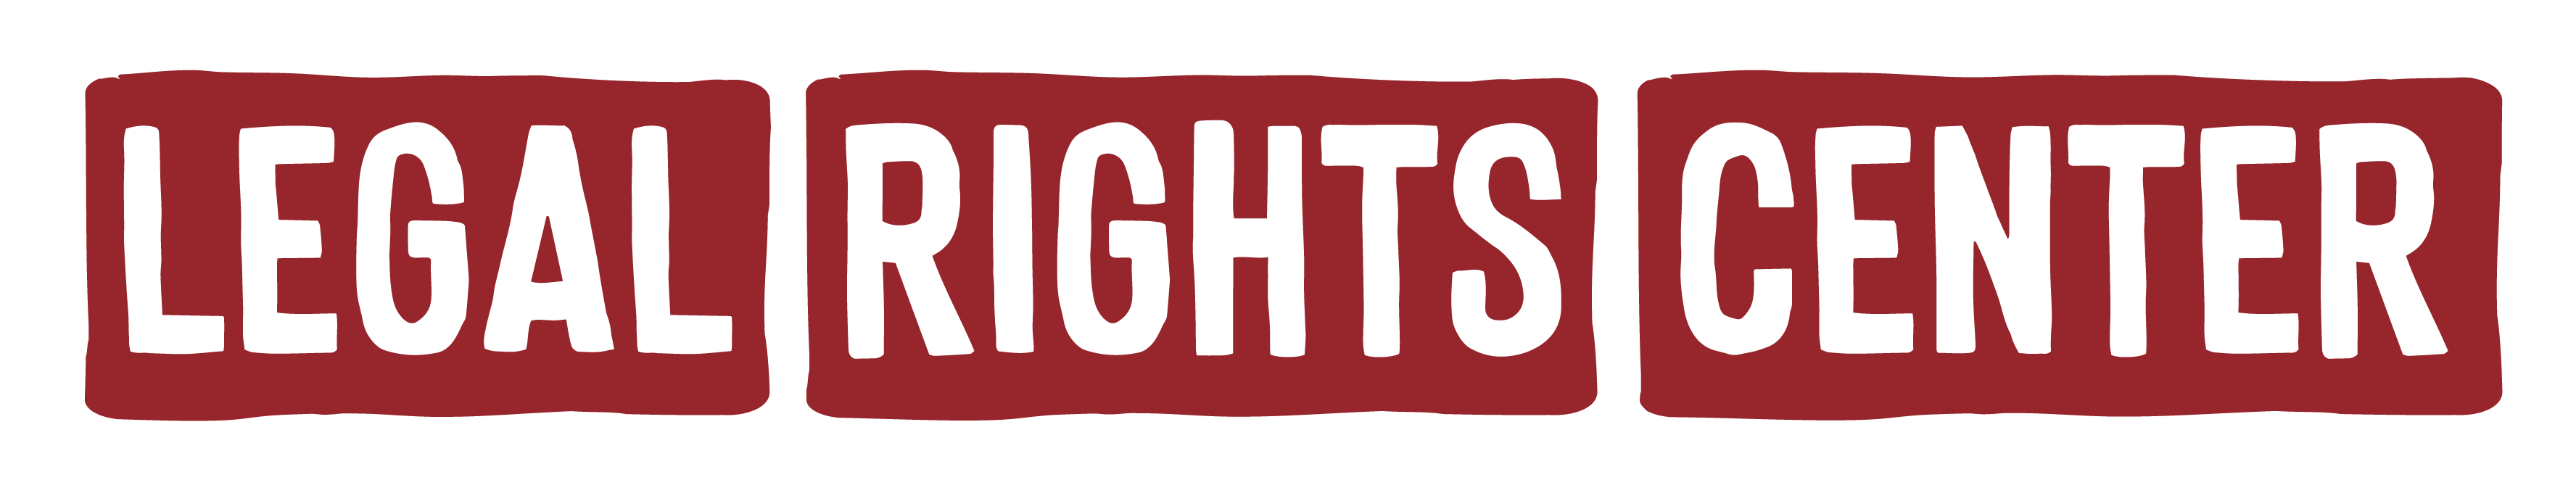 Legal Rights Center Secondary Logo